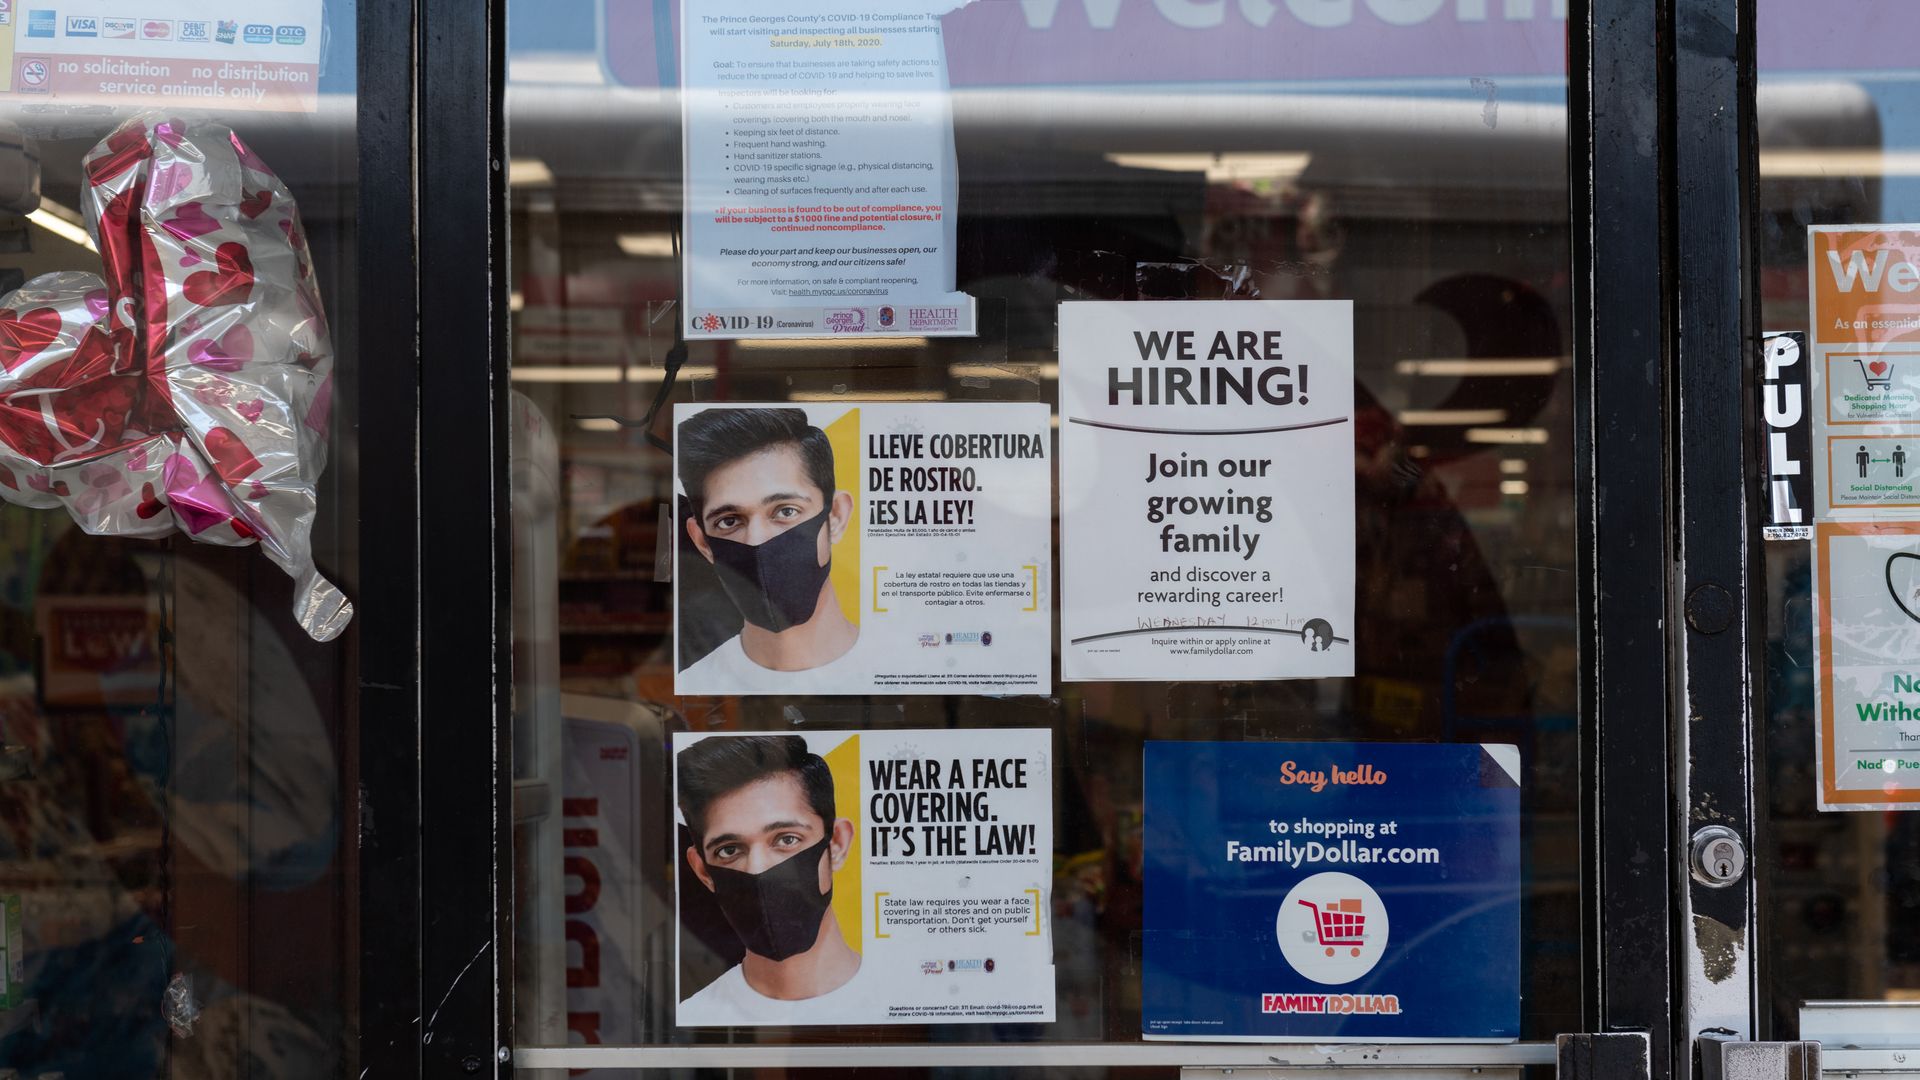 A "we are hiring" sign on a glass door